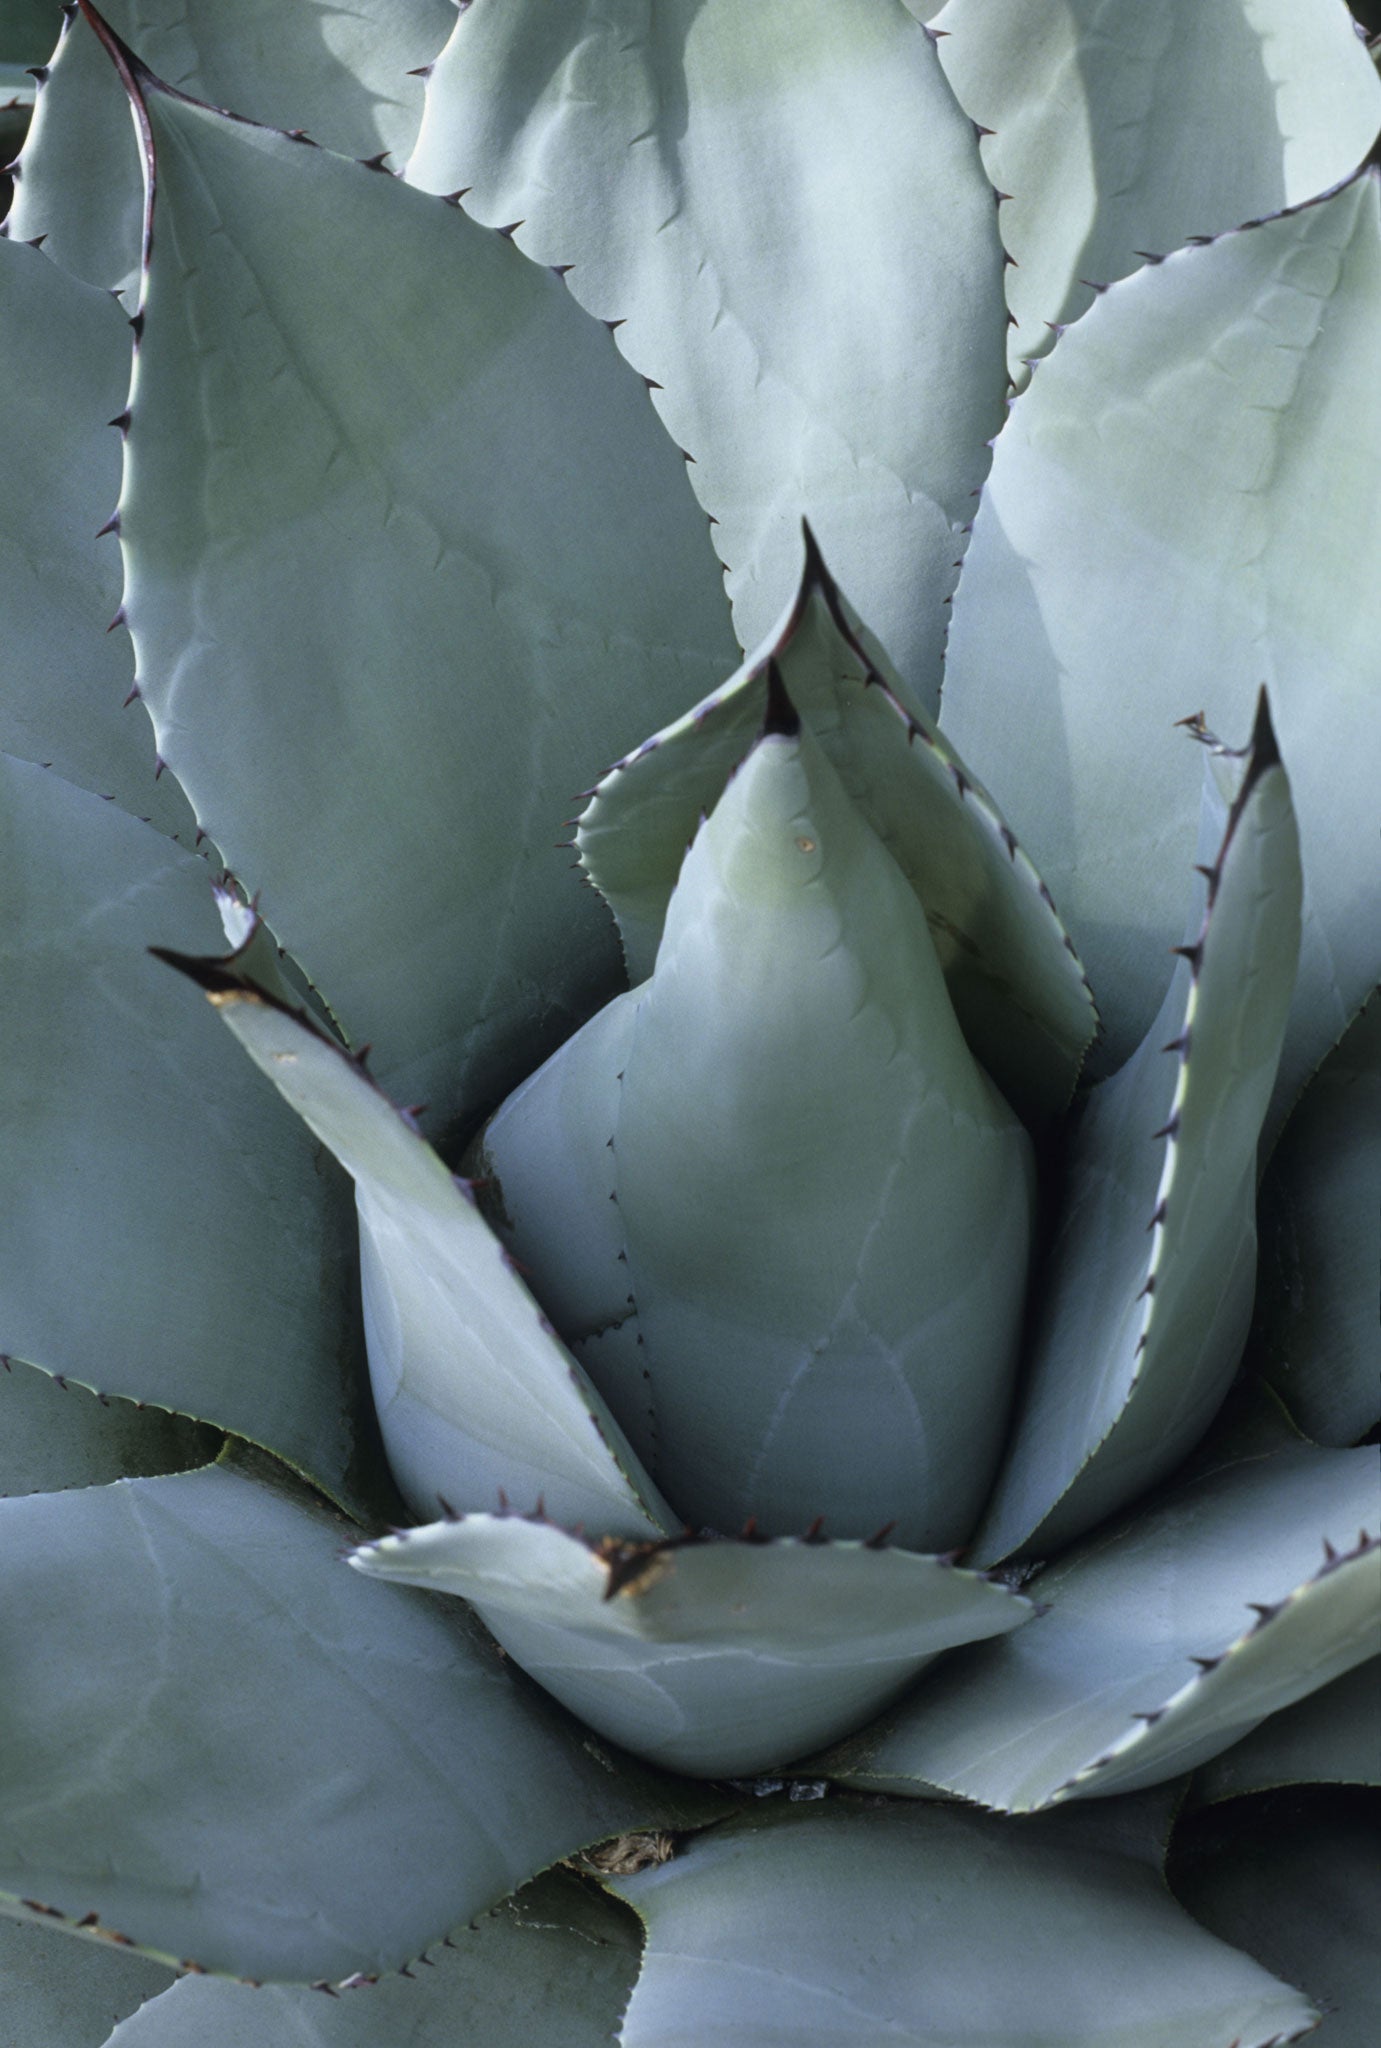 The agave is a spiky rosette of grey-green leaves that brings a touch of the Arizona desert to suburban England